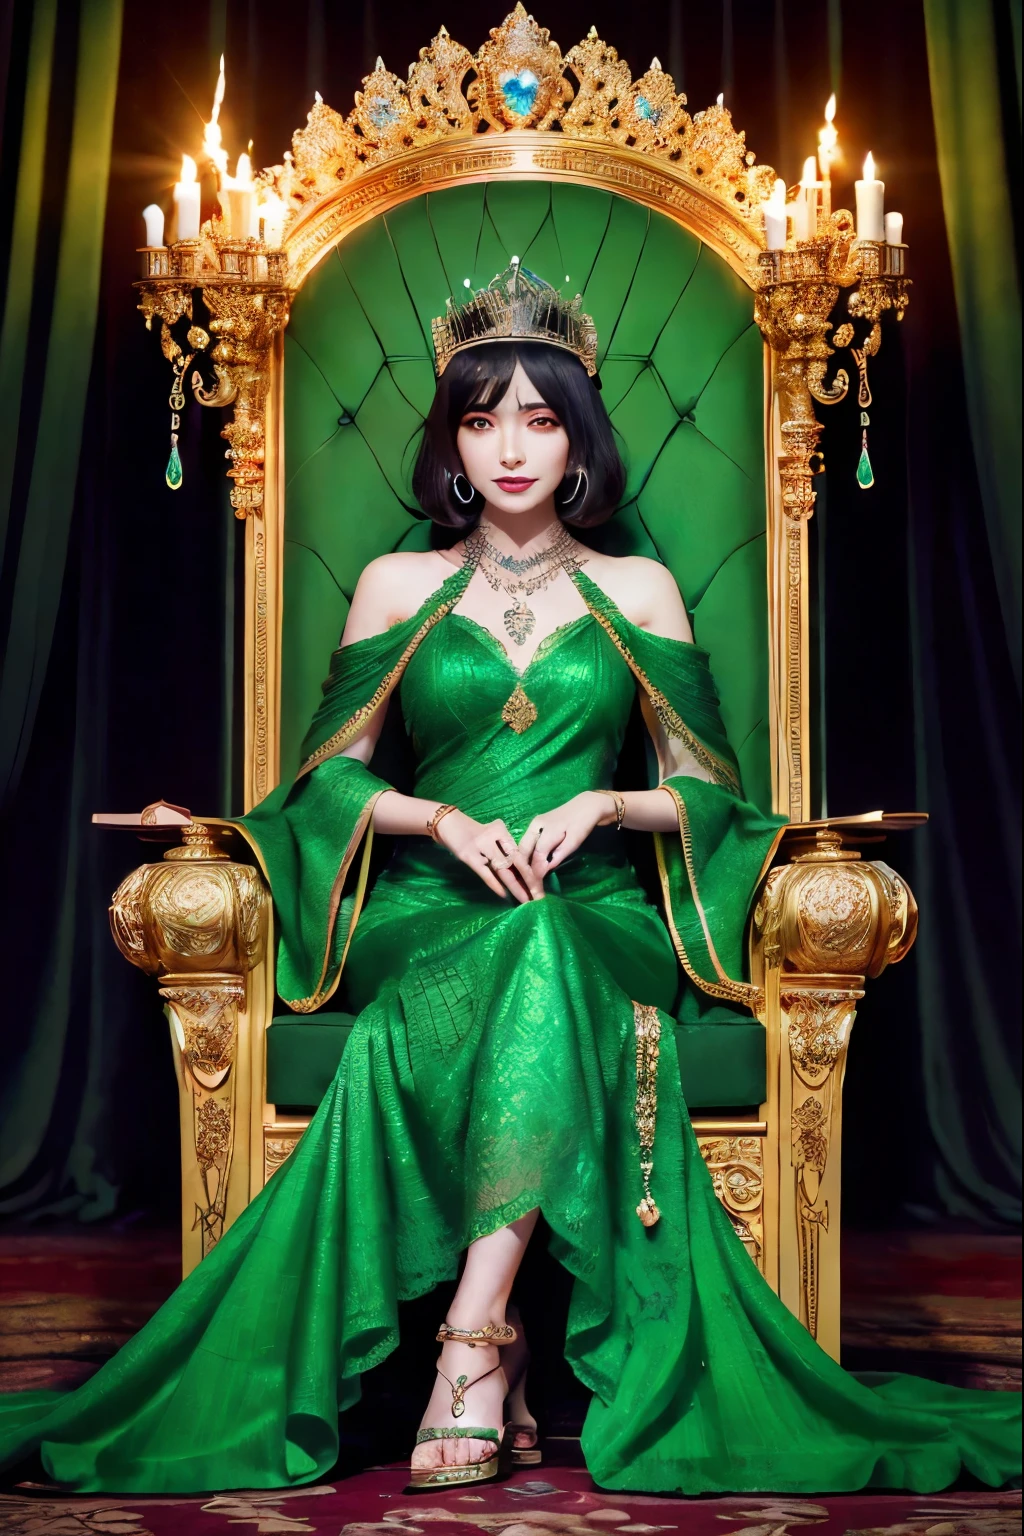 (Ultra-detailed face, Brutal eyes), (Fantasy Illustration with Gothic & Ukiyo-e & Comic Art), (Full Body, A middle-aged ice elf woman with silver hair, blunt bangs, very very long disheveled hair, and silver skin, Eyes burning yerrow), (The queen wears a jade tiara, a large jeweled necklace and earrings, a long lacy deep green silk dress, and jeweled green sandals), (The green demon queen lies on a huge, tall throne, hands on her cheeks and a brutal smile on her face), BREAK (An opulent, tall, gigantic gothic throne of glittering splendor, adorned with gems and precious metals. It looks dark:1.2), (In the background, long curtains and many candelabras line either side of the queen's throne in the royal palace), (Perspective looking up from the foot of the throne)